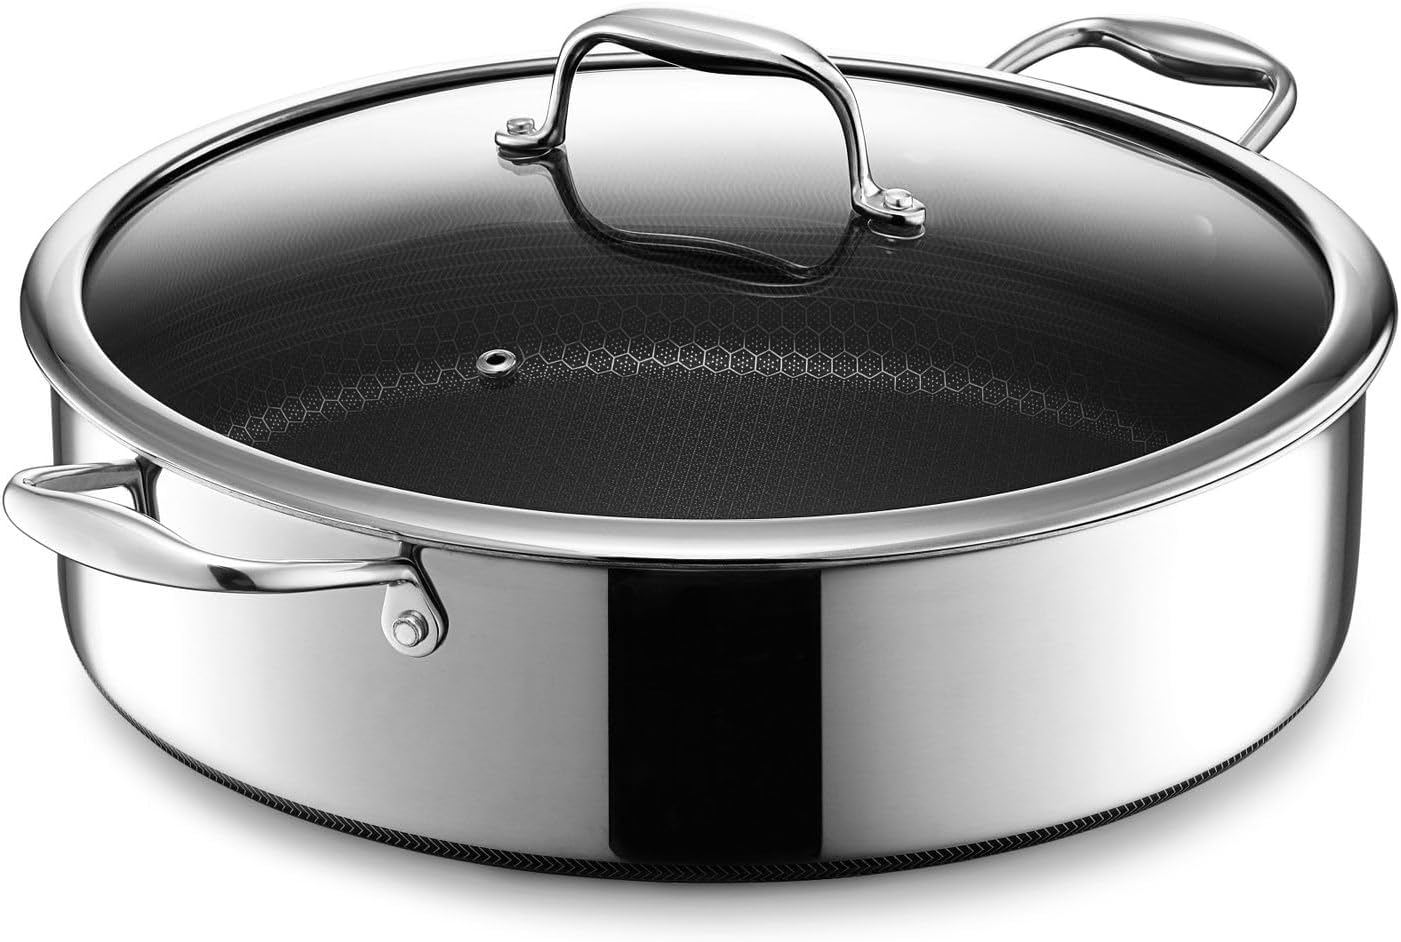 HexClad Hybrid Nonstick 7-Inch Fry Pan, Stay-Cool Handle, Dishwasher and  Oven Safe, Induction Ready, Compatible with All Cooktops